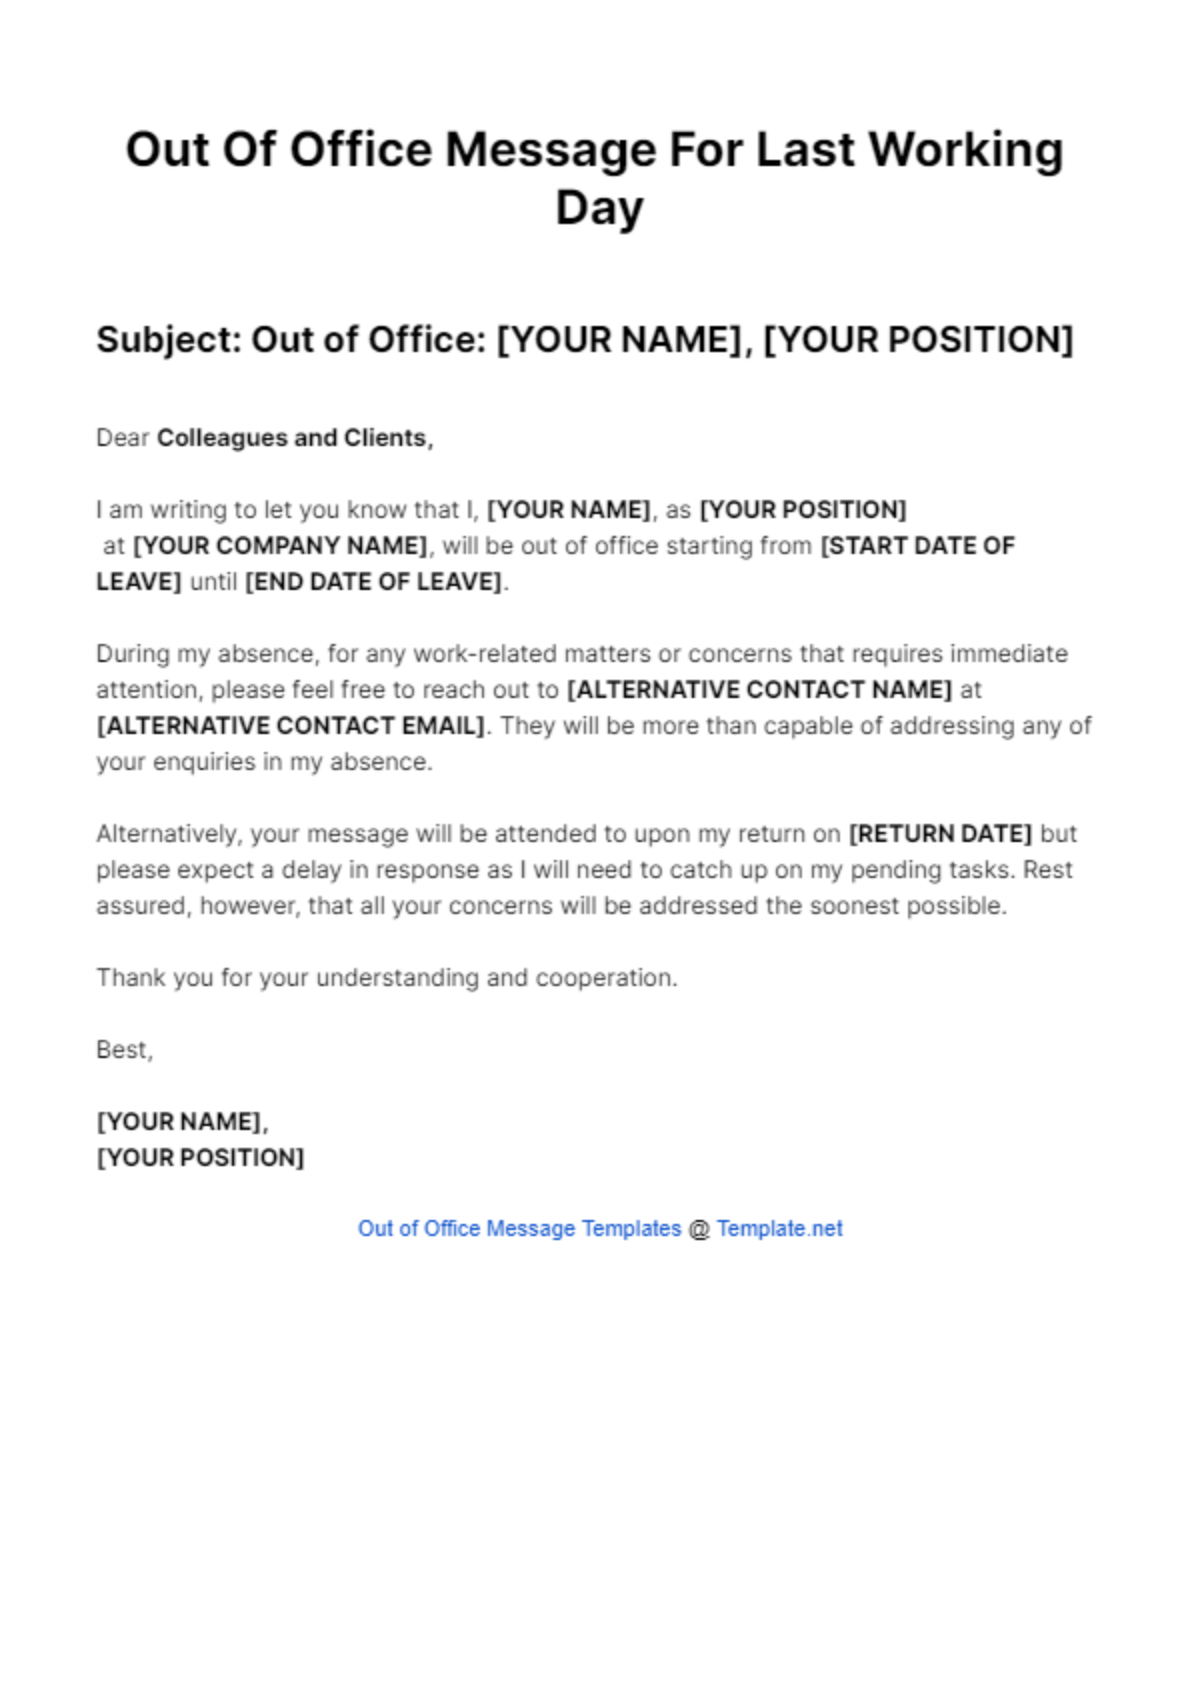 Out Of Office Message For Last Working Day Template